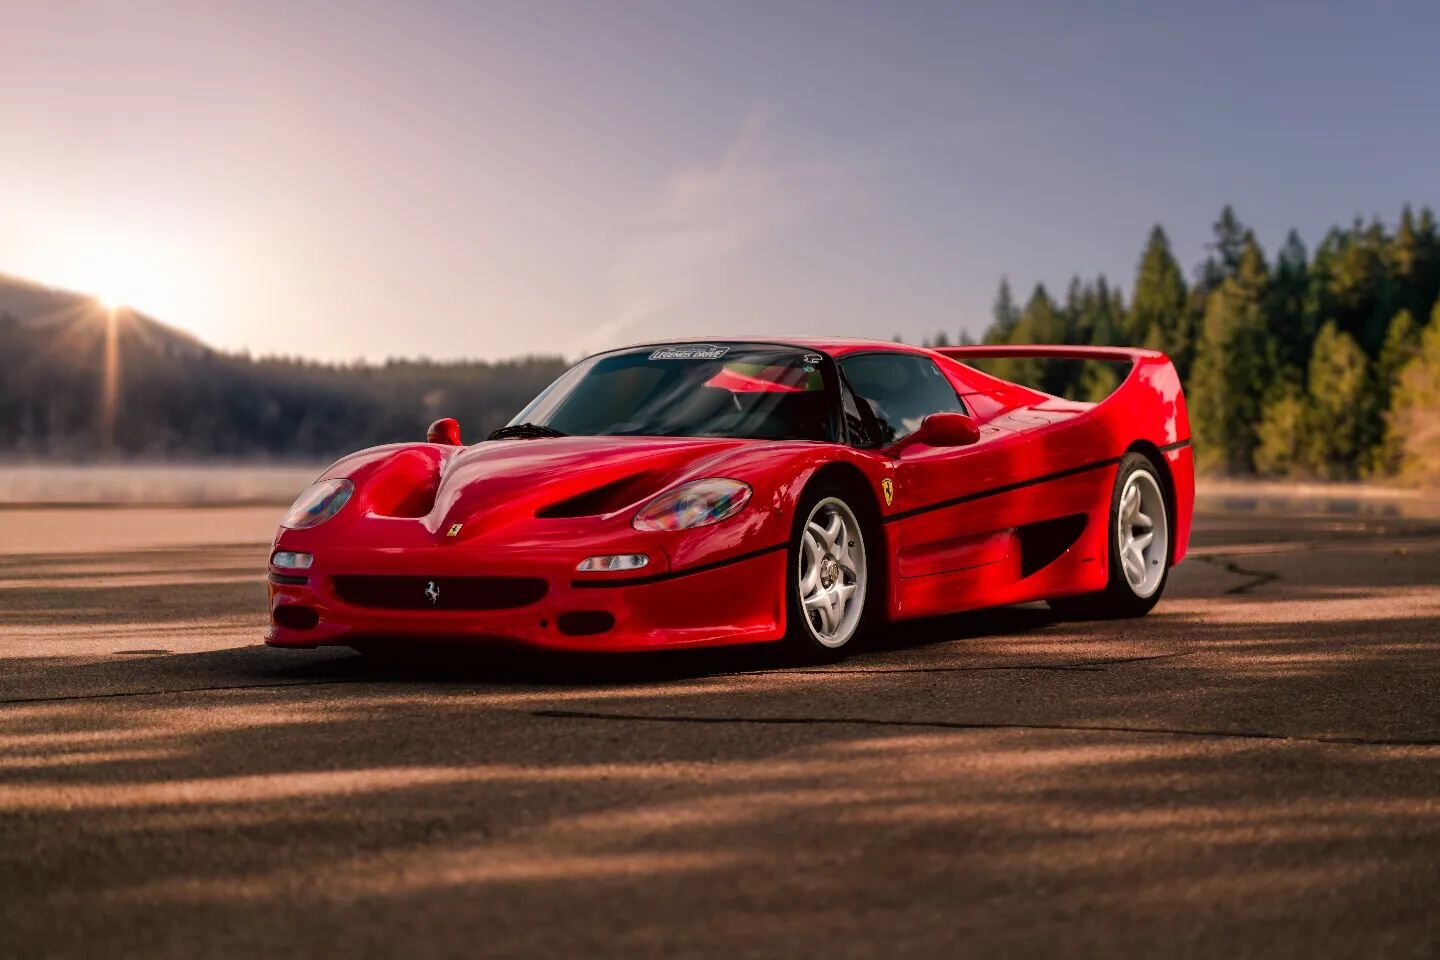 Absolutely love how this shot turned out. Hurry up summer, we've got work to do! 

Owner: @epicwin_f50 
Shot and edit: @donovan.n.wagner 

#ferrari #f50 #ferrarif50 #grandtouring #yyc #Calgary